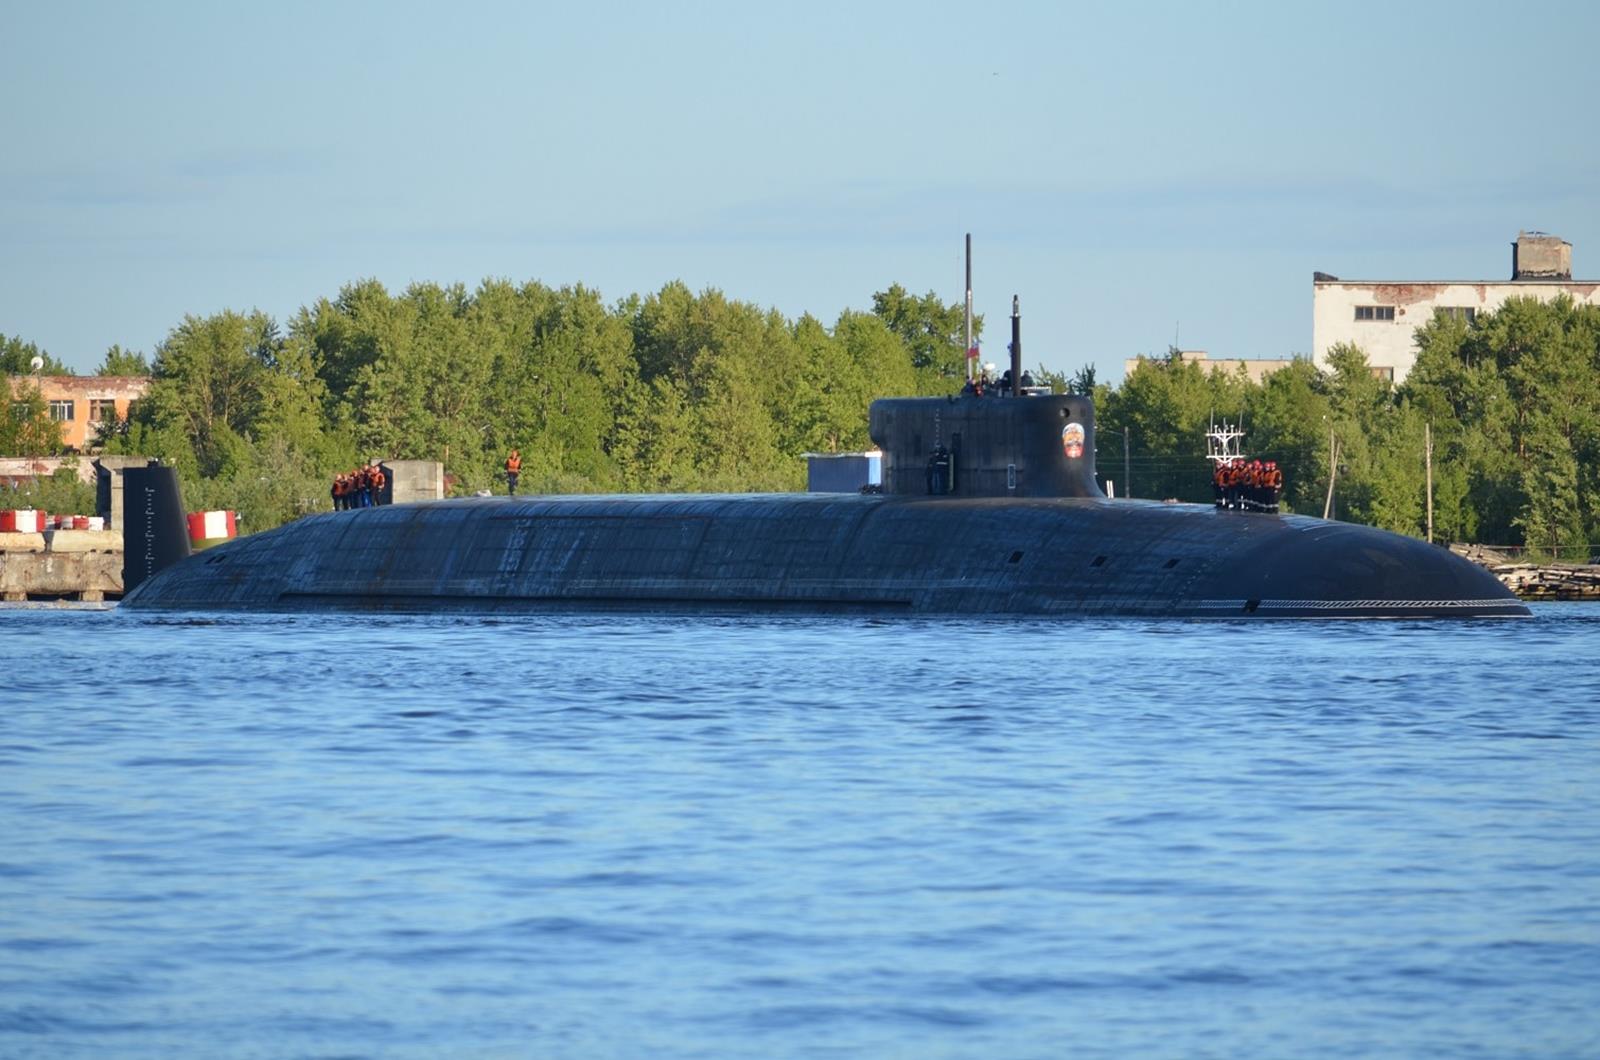 Three of Russia's nuclear-powered submarines will soon enter service